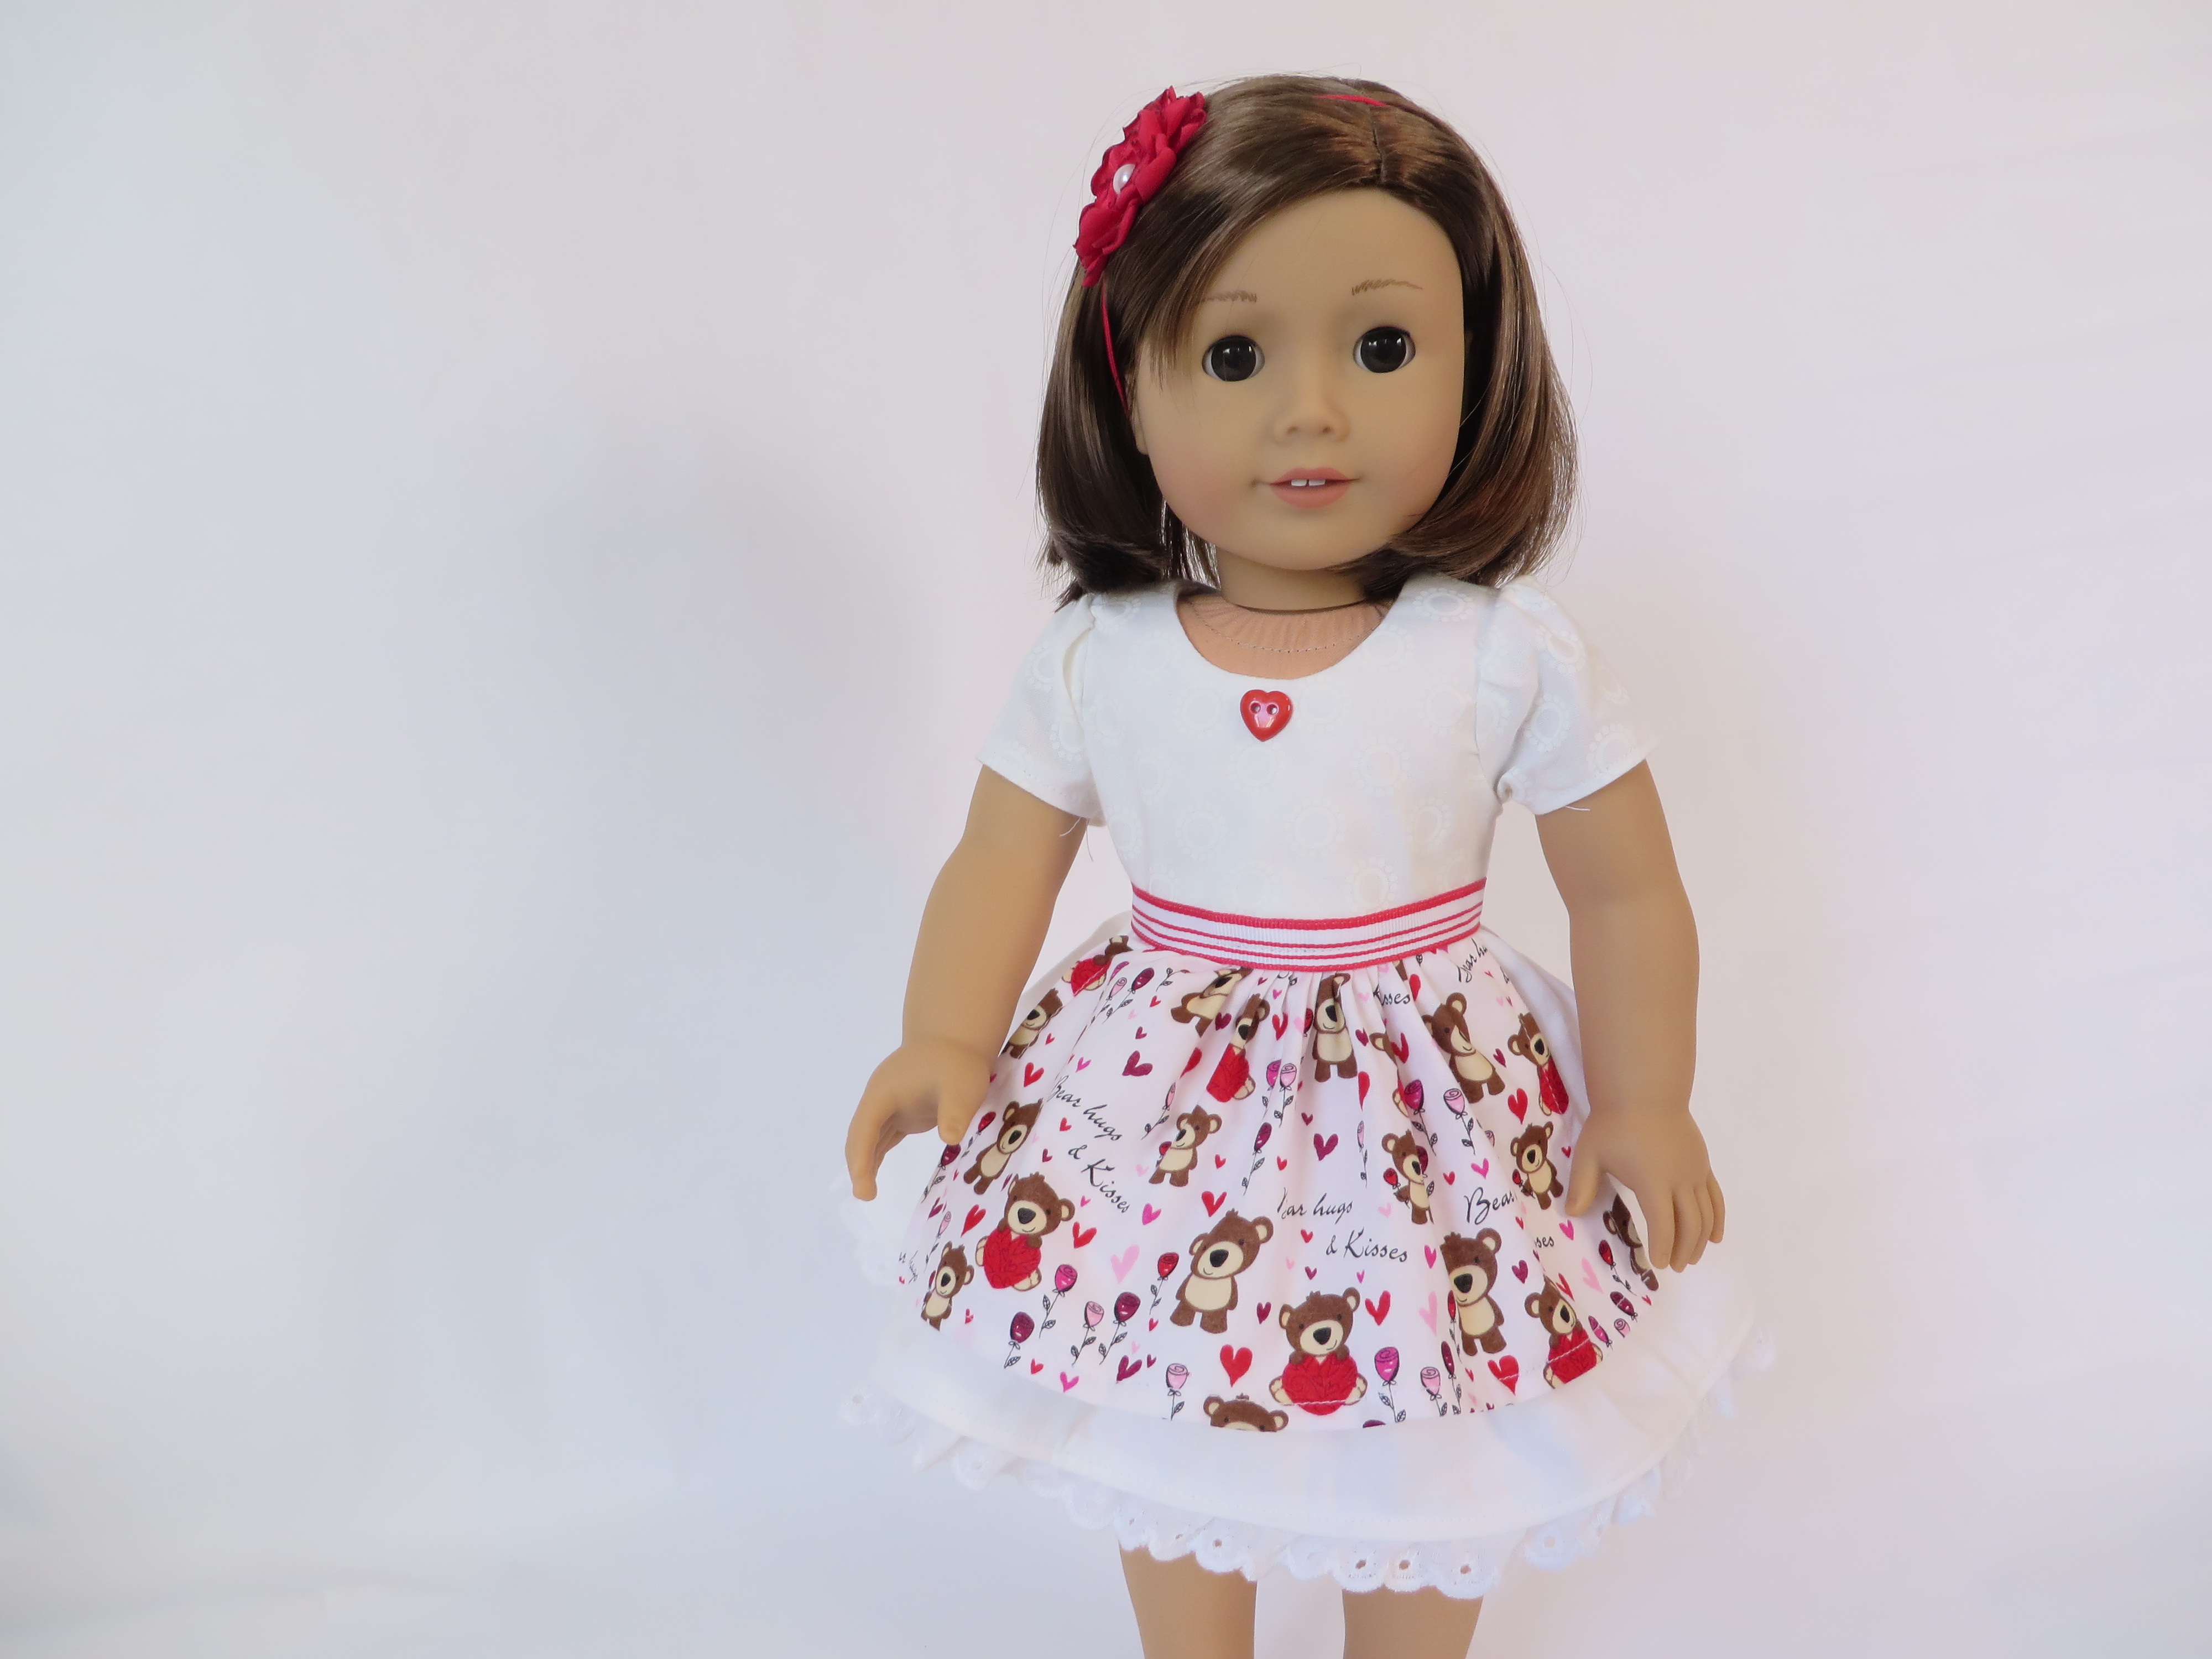 Make a cute dress for your 18 inch doll for Valentine's day. The Sugar n Spice PDF sewing pattern's white dress can be worn for any holiday with a cute apron over the top. Find the Oh Sew Kat! pattern on Etsy. #valentinesdaydress #18inchdolls #americangirl #sewingpattern #ohsewkat